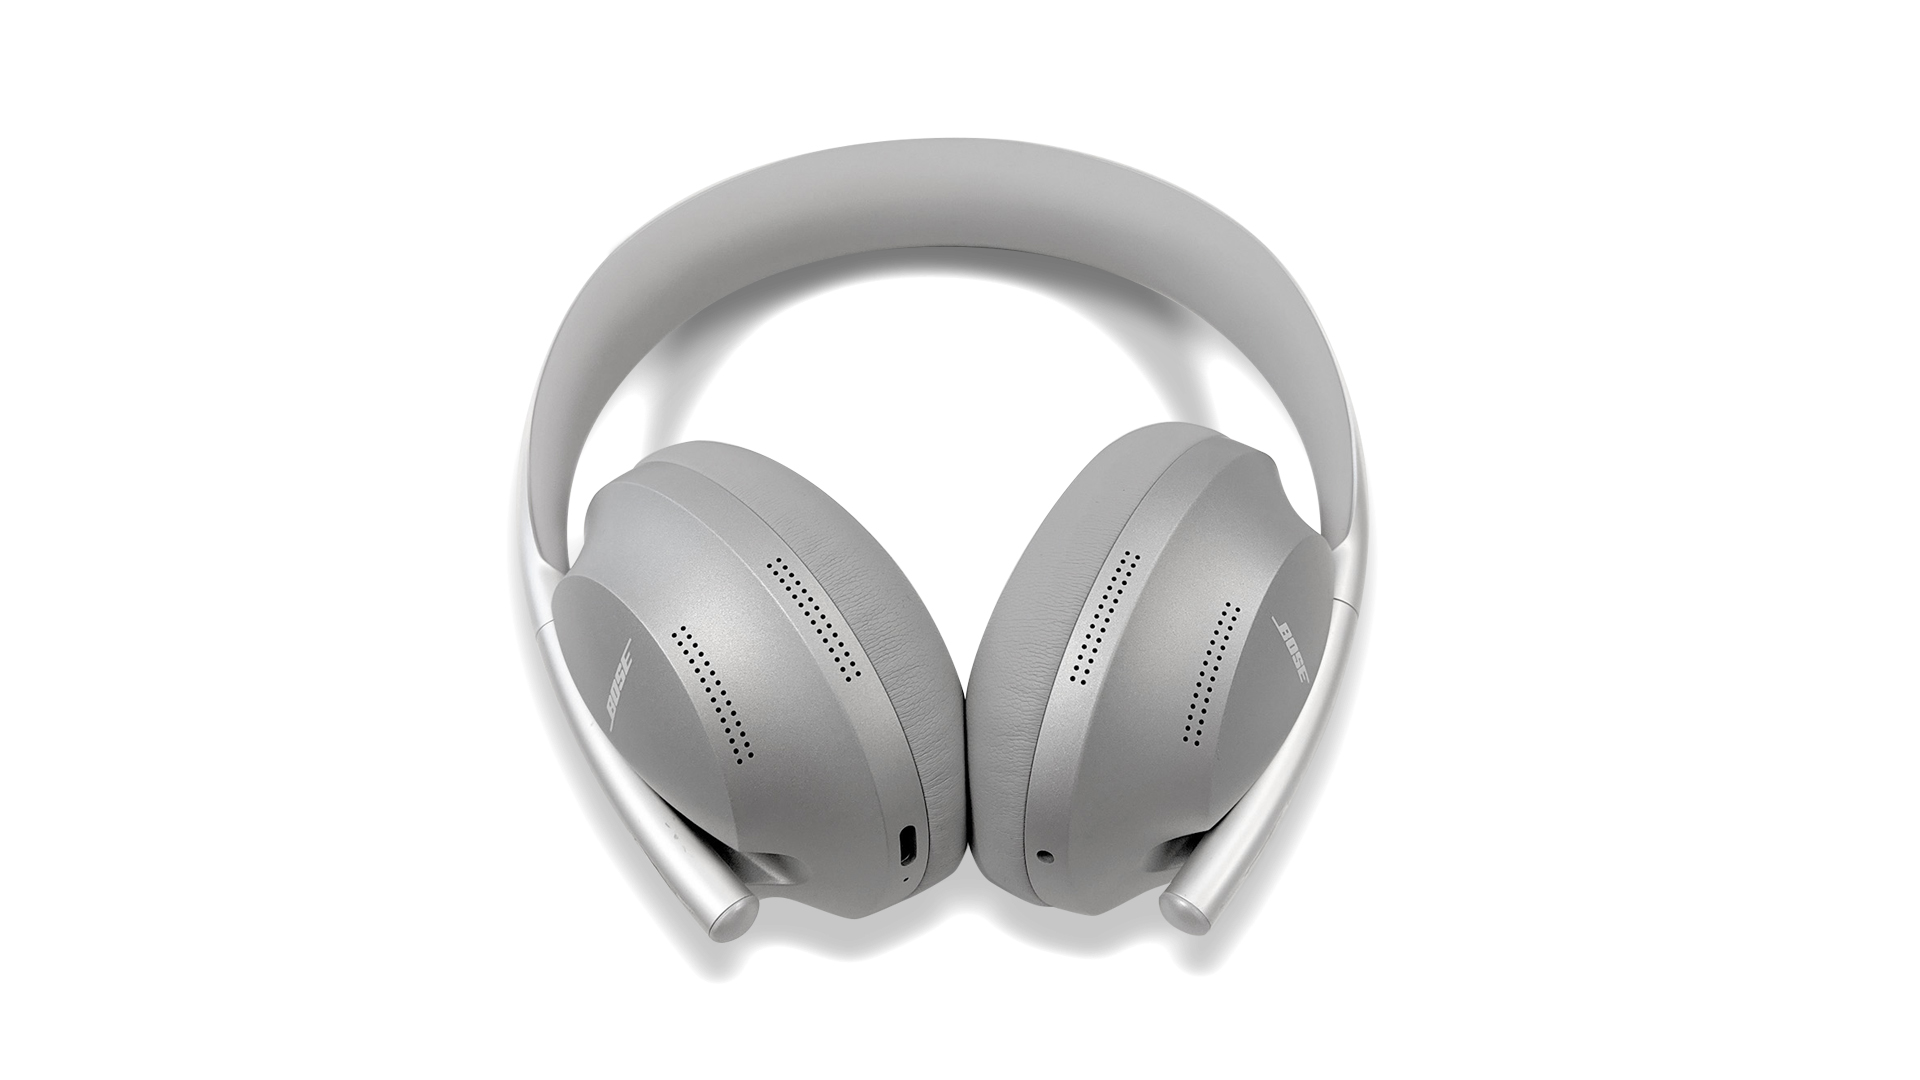 The Bose Noise Cancelling Headphones 700 in silver